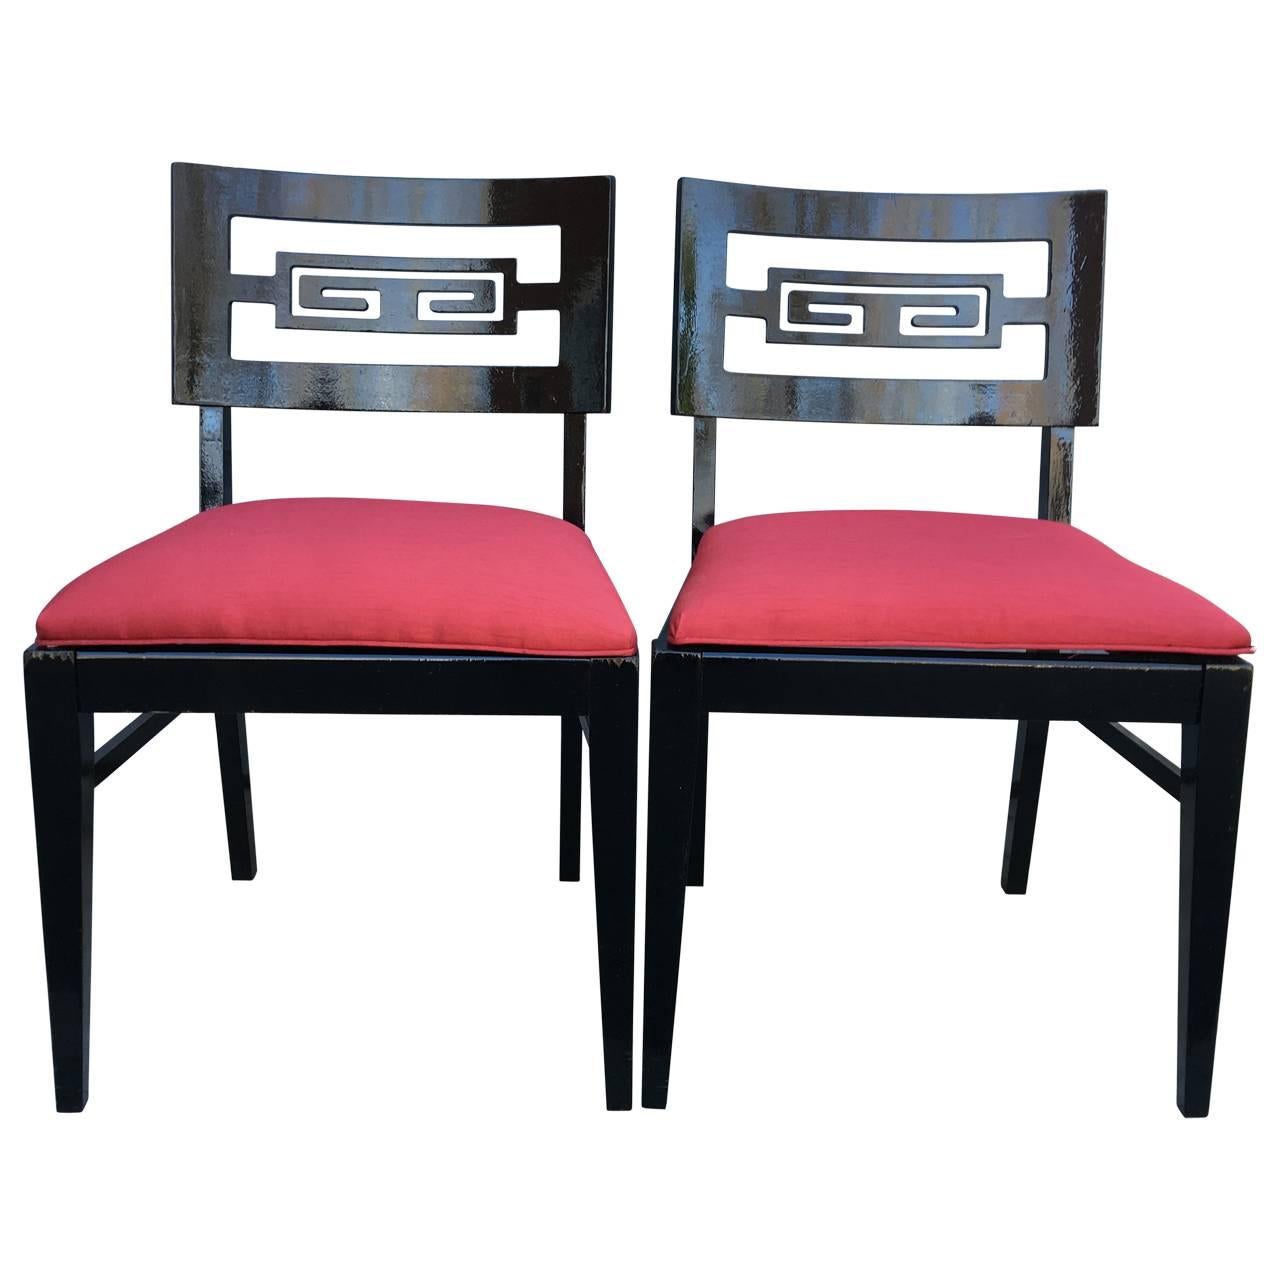 Two arm chairs and two dining chairs by James Mont style dining chairs. Black glossy paint.